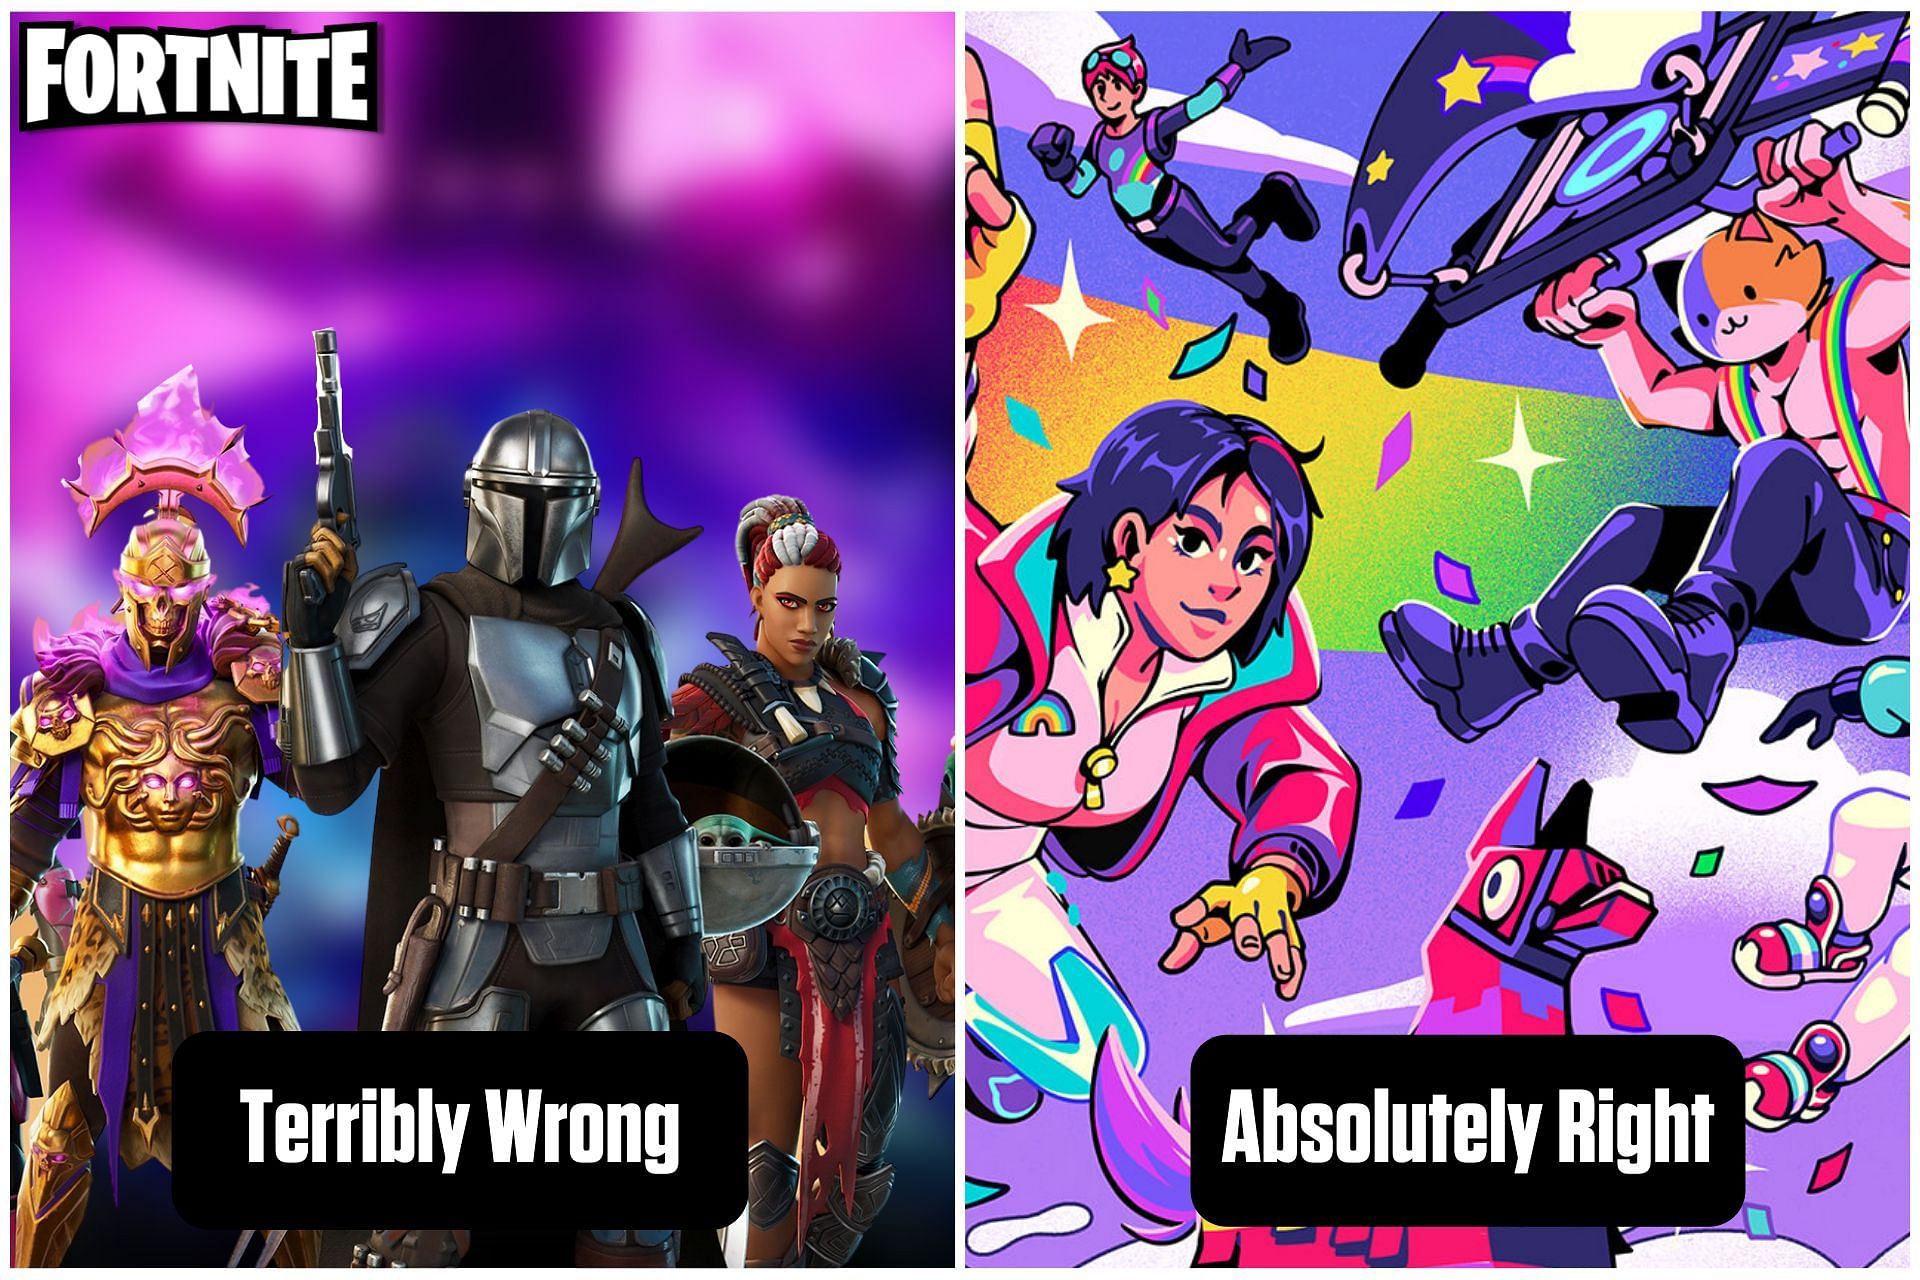 Fortnite got some things right and other things wrong. (Image via Sportskeeda)